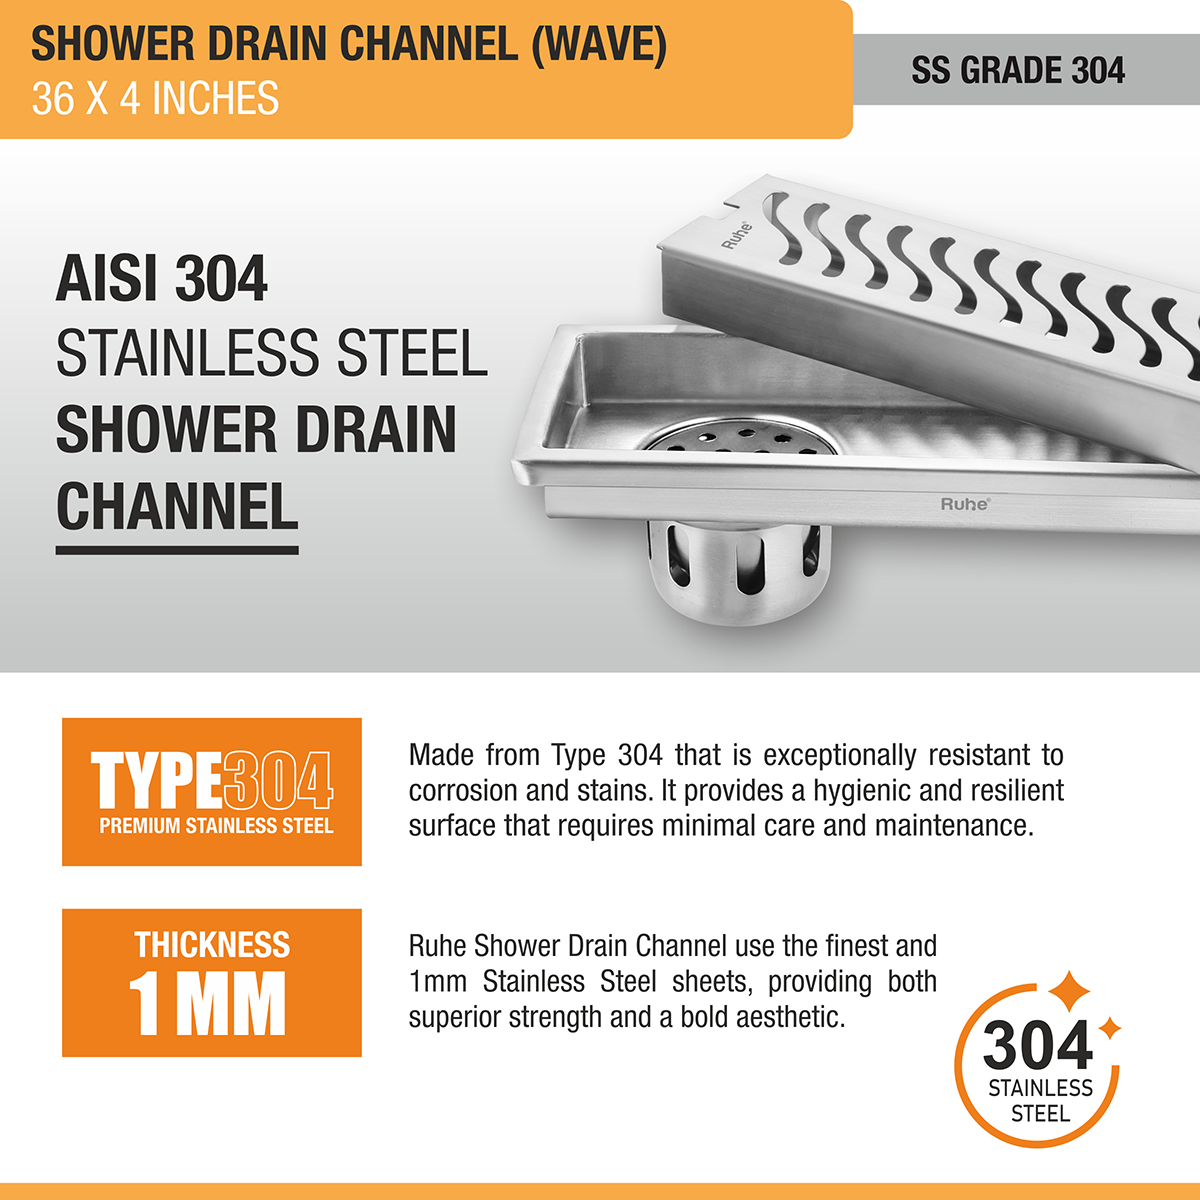 Wave Shower Drain Channel (36 X 4 Inches) with Cockroach Trap (304 Grade) stainless steel